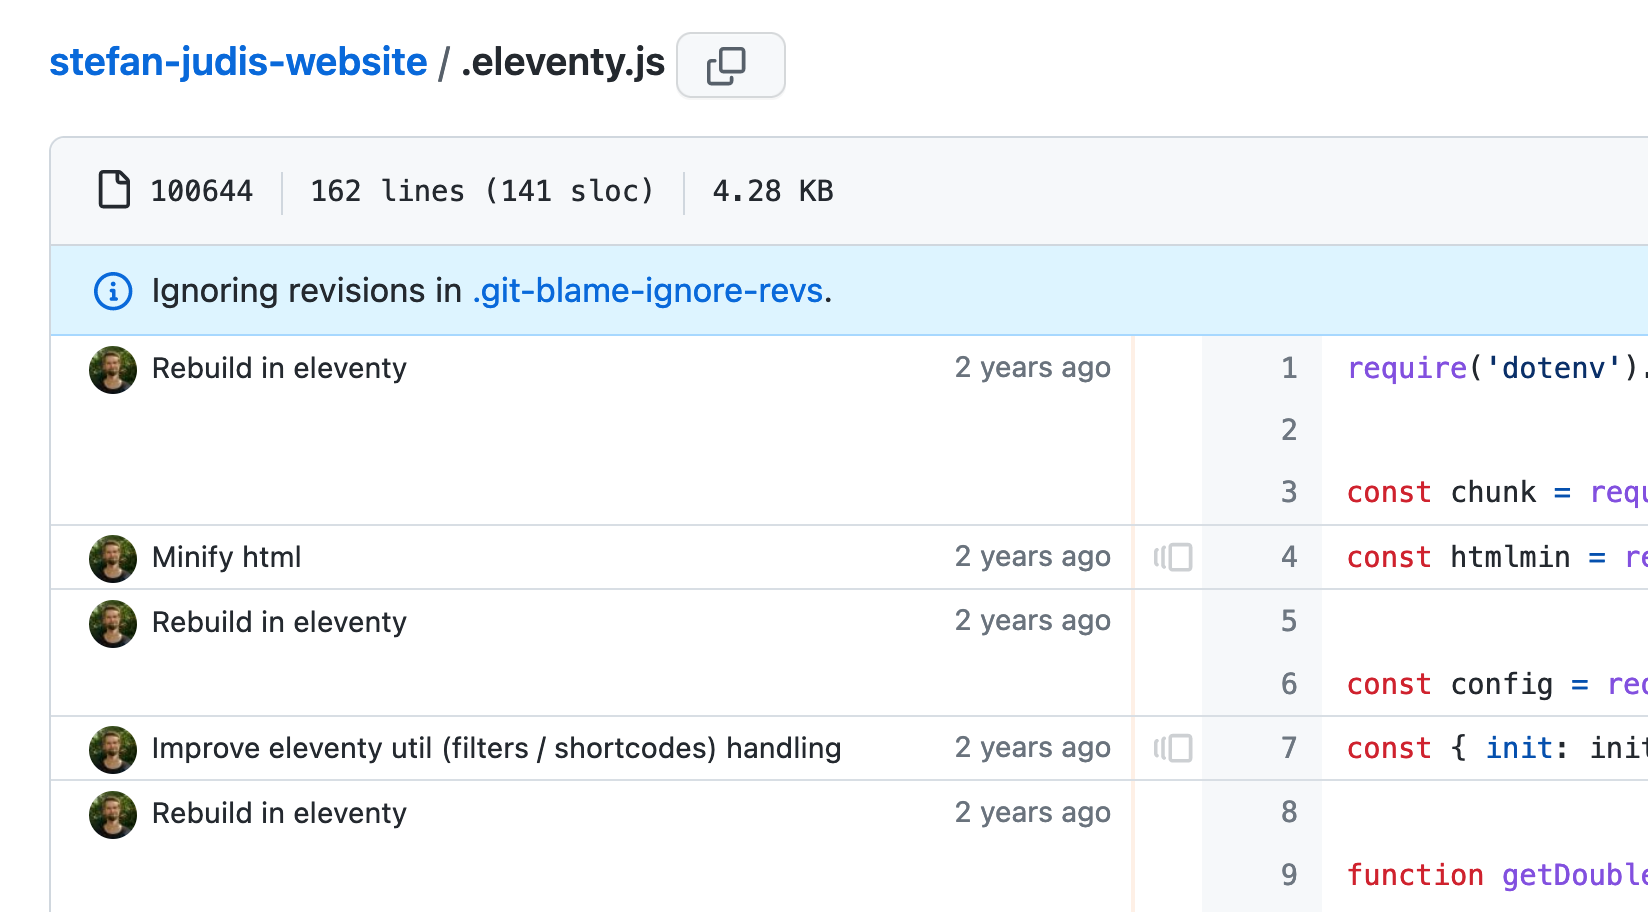 GitHub blame interface telling that it's ignoring revisions due to a .git-blame-ignore-revs file.